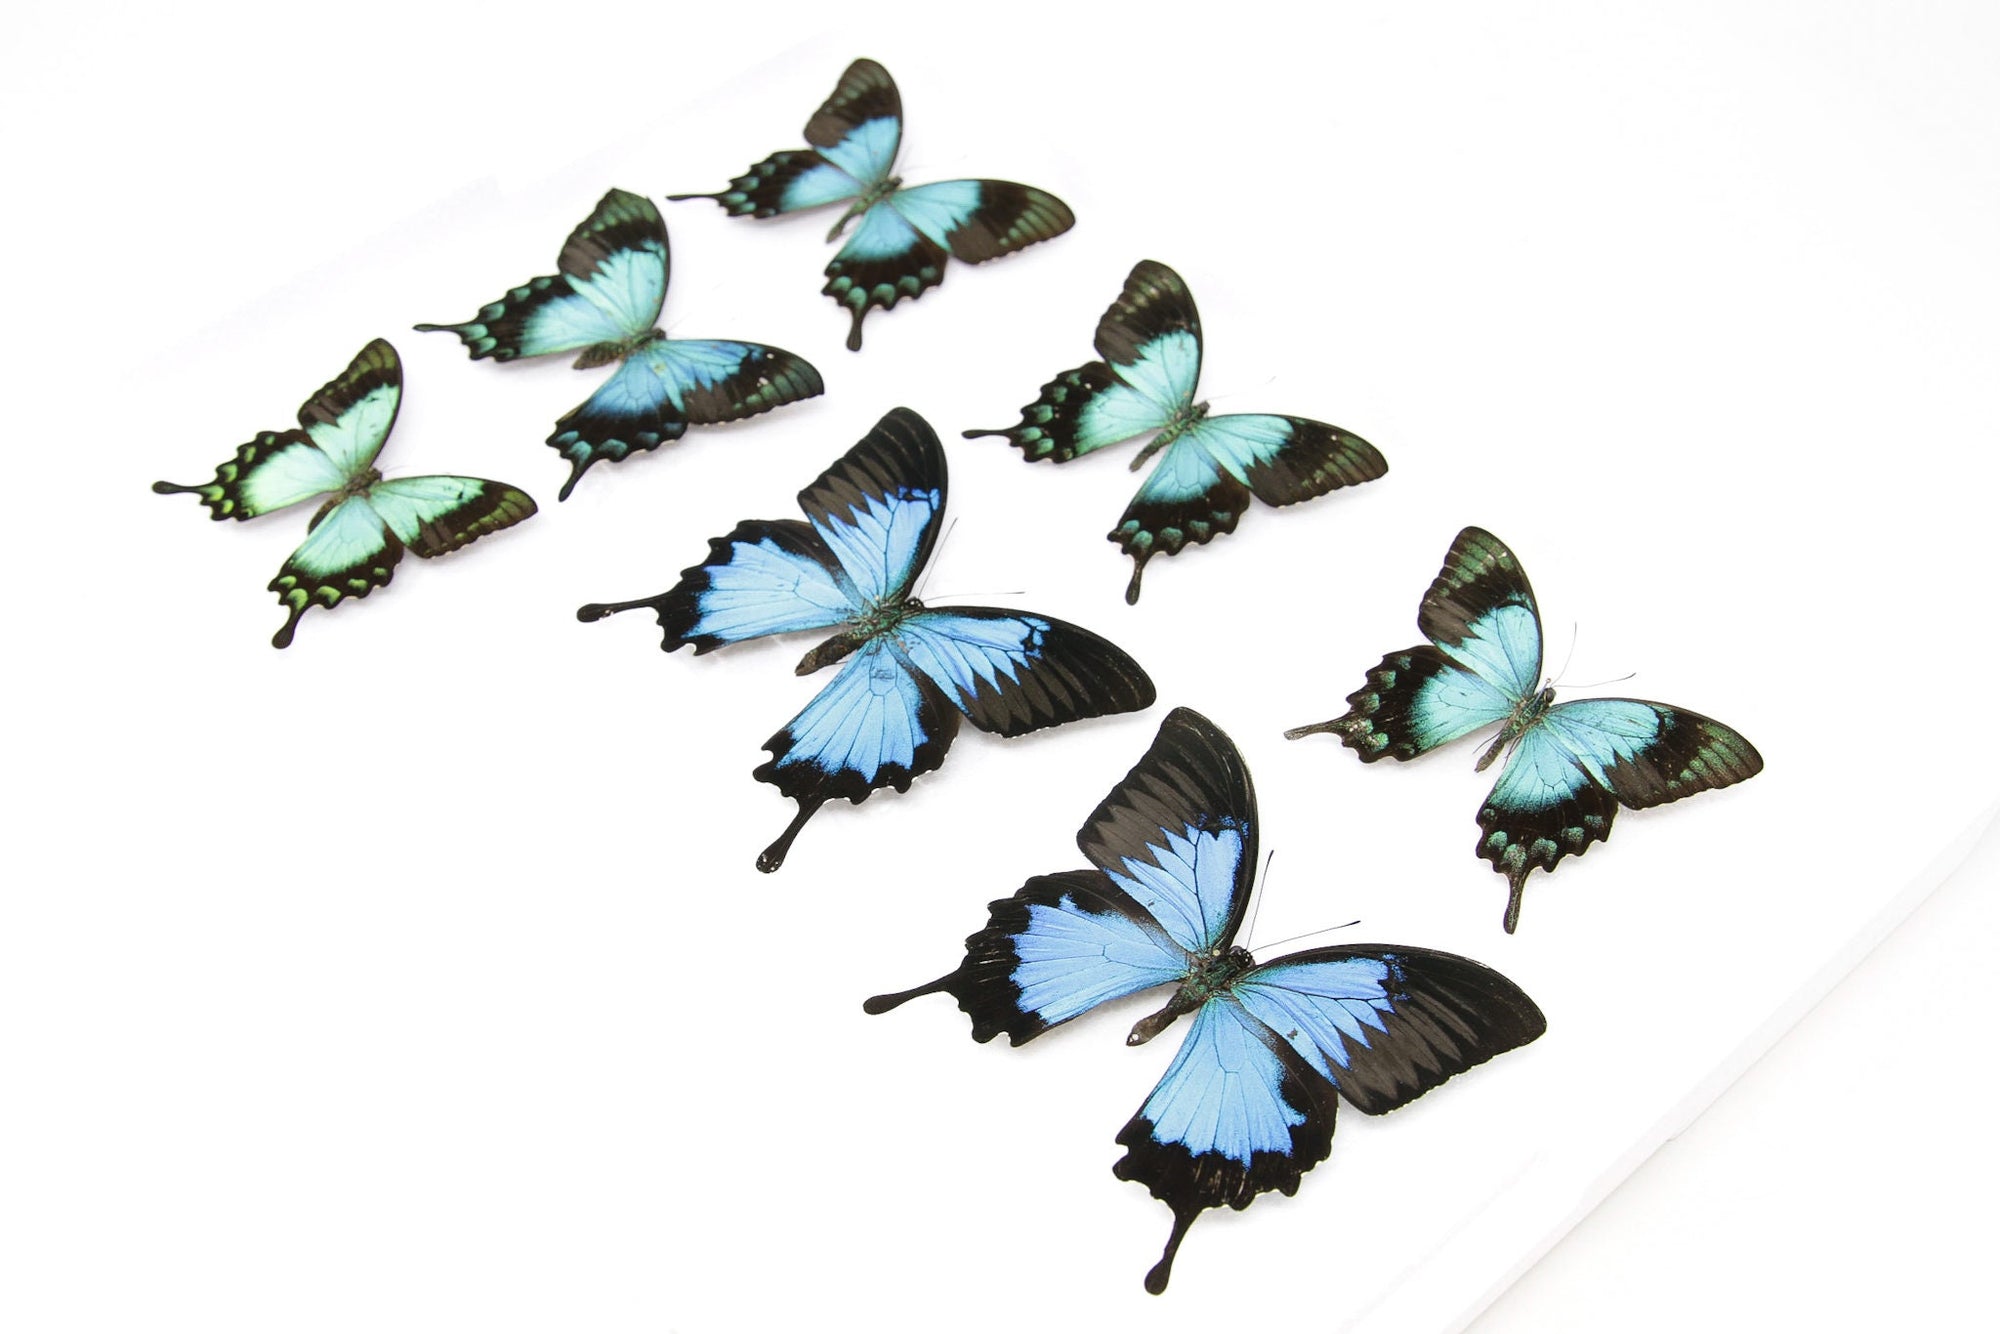 SECONDS (A-/A2) A Collection of Papilio Swallowtail Butterflies, Pinned Spread Entomology Taxidermy Specimens